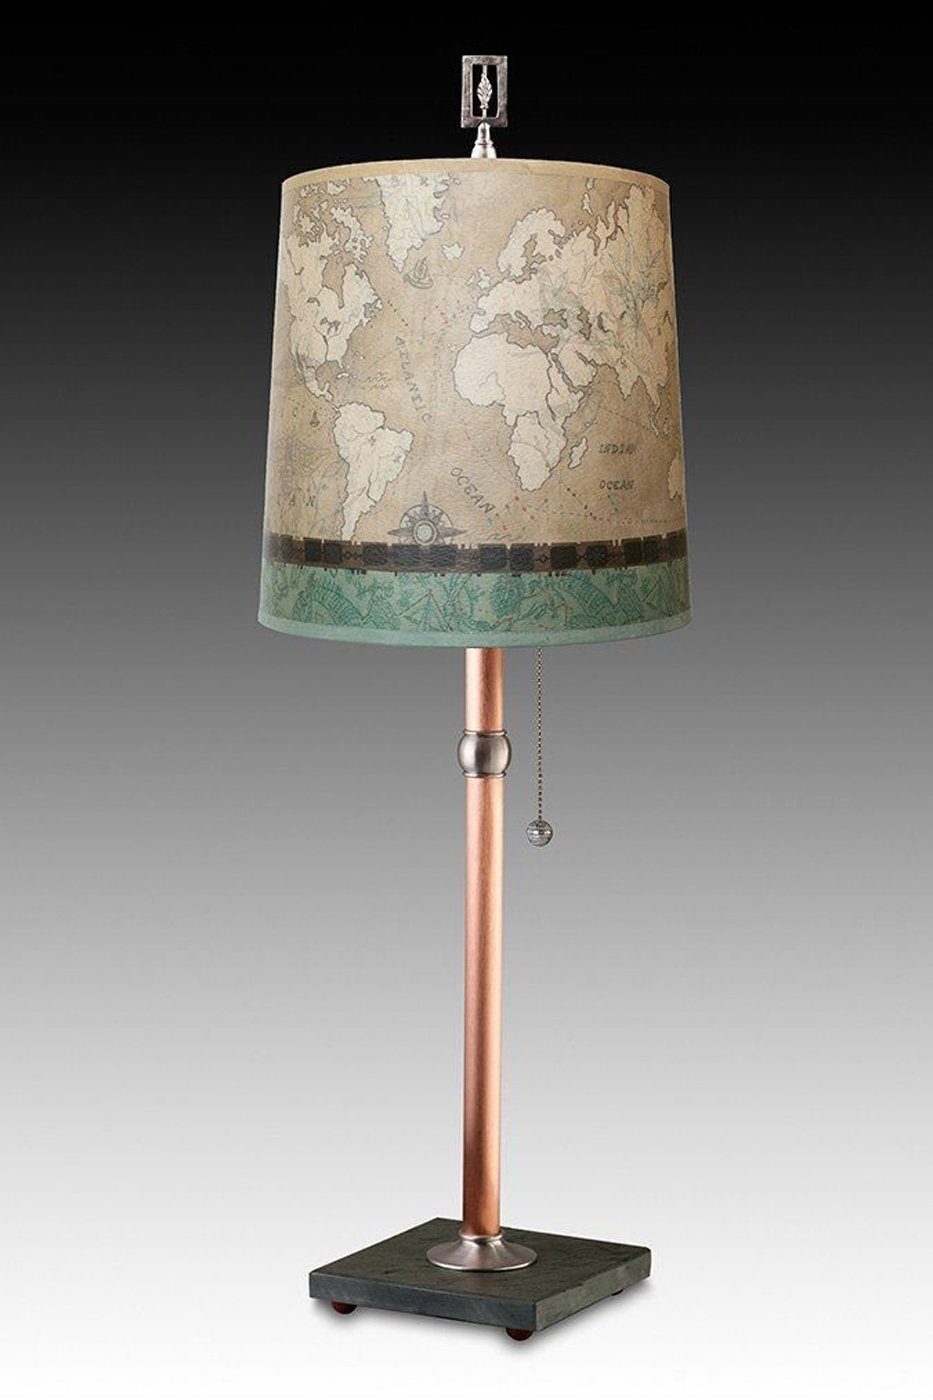 Janna Ugone &amp; Co Table Lamps Copper Table Lamp with Medium Drum Shade in Voyages